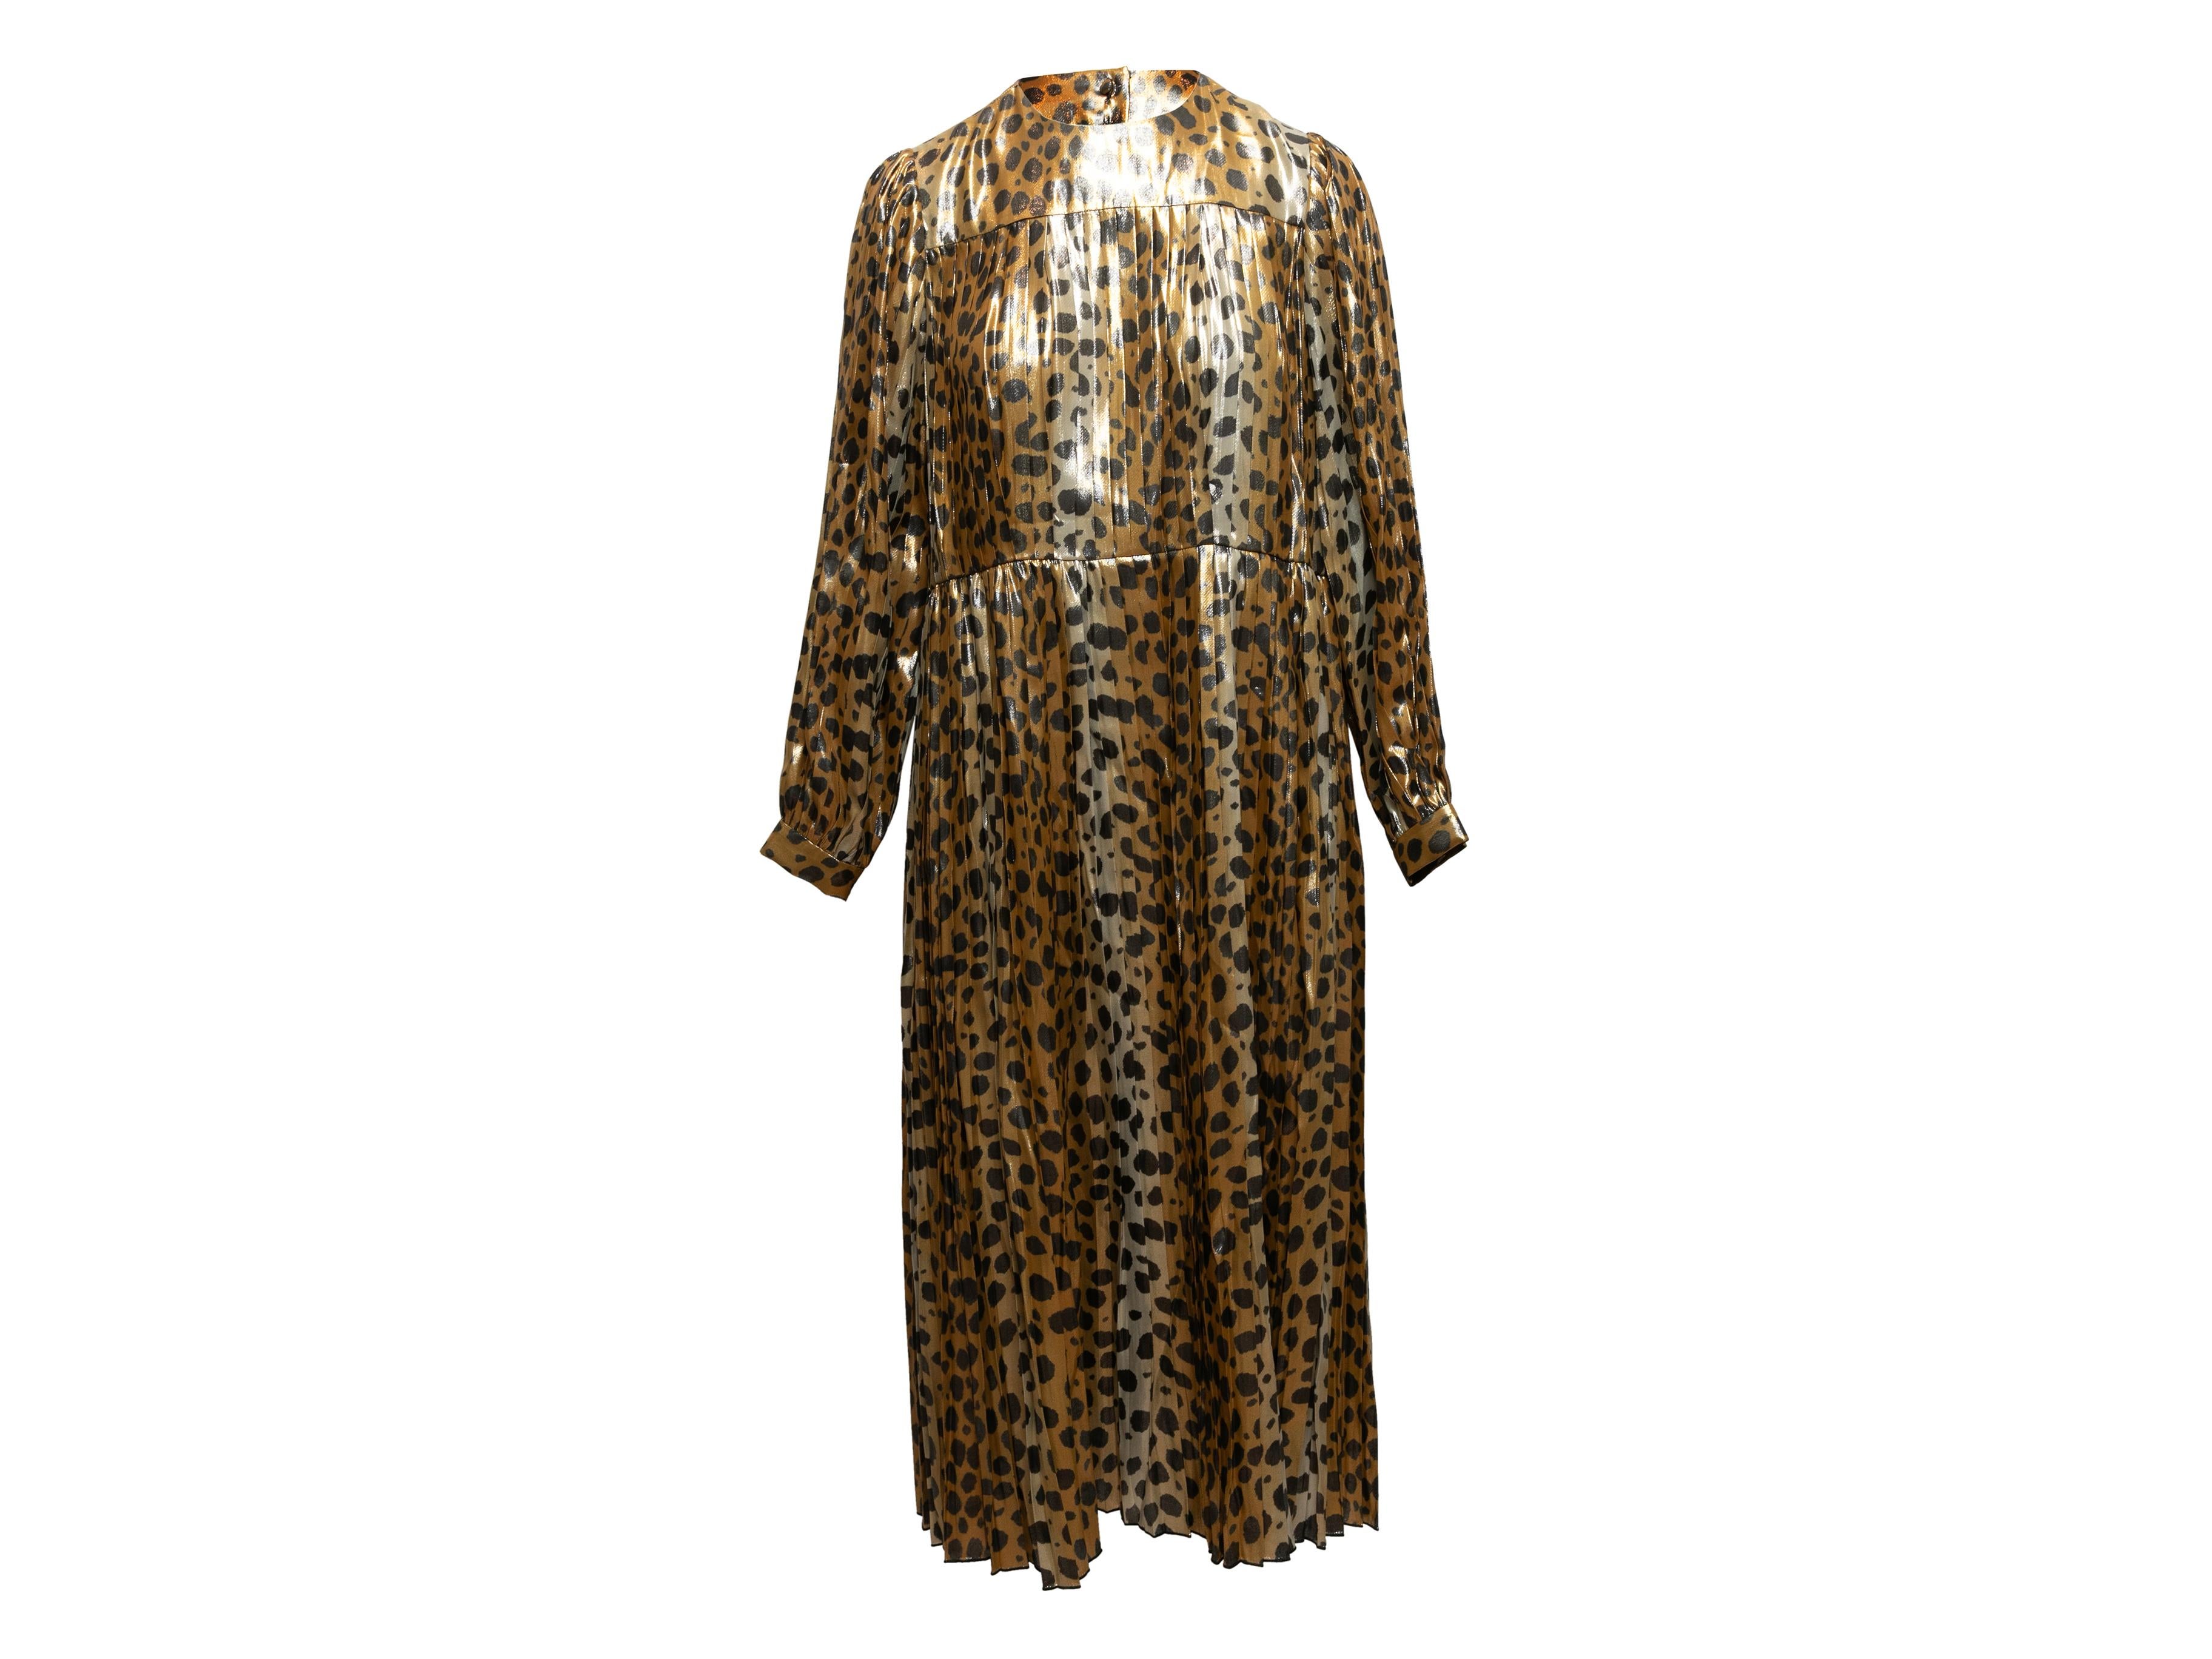 Gold and black silk cheetah print dress by Runway Marc Jacobs. Crew neck. Long sleeves. Sash tie at waist. Button closures at back. 39